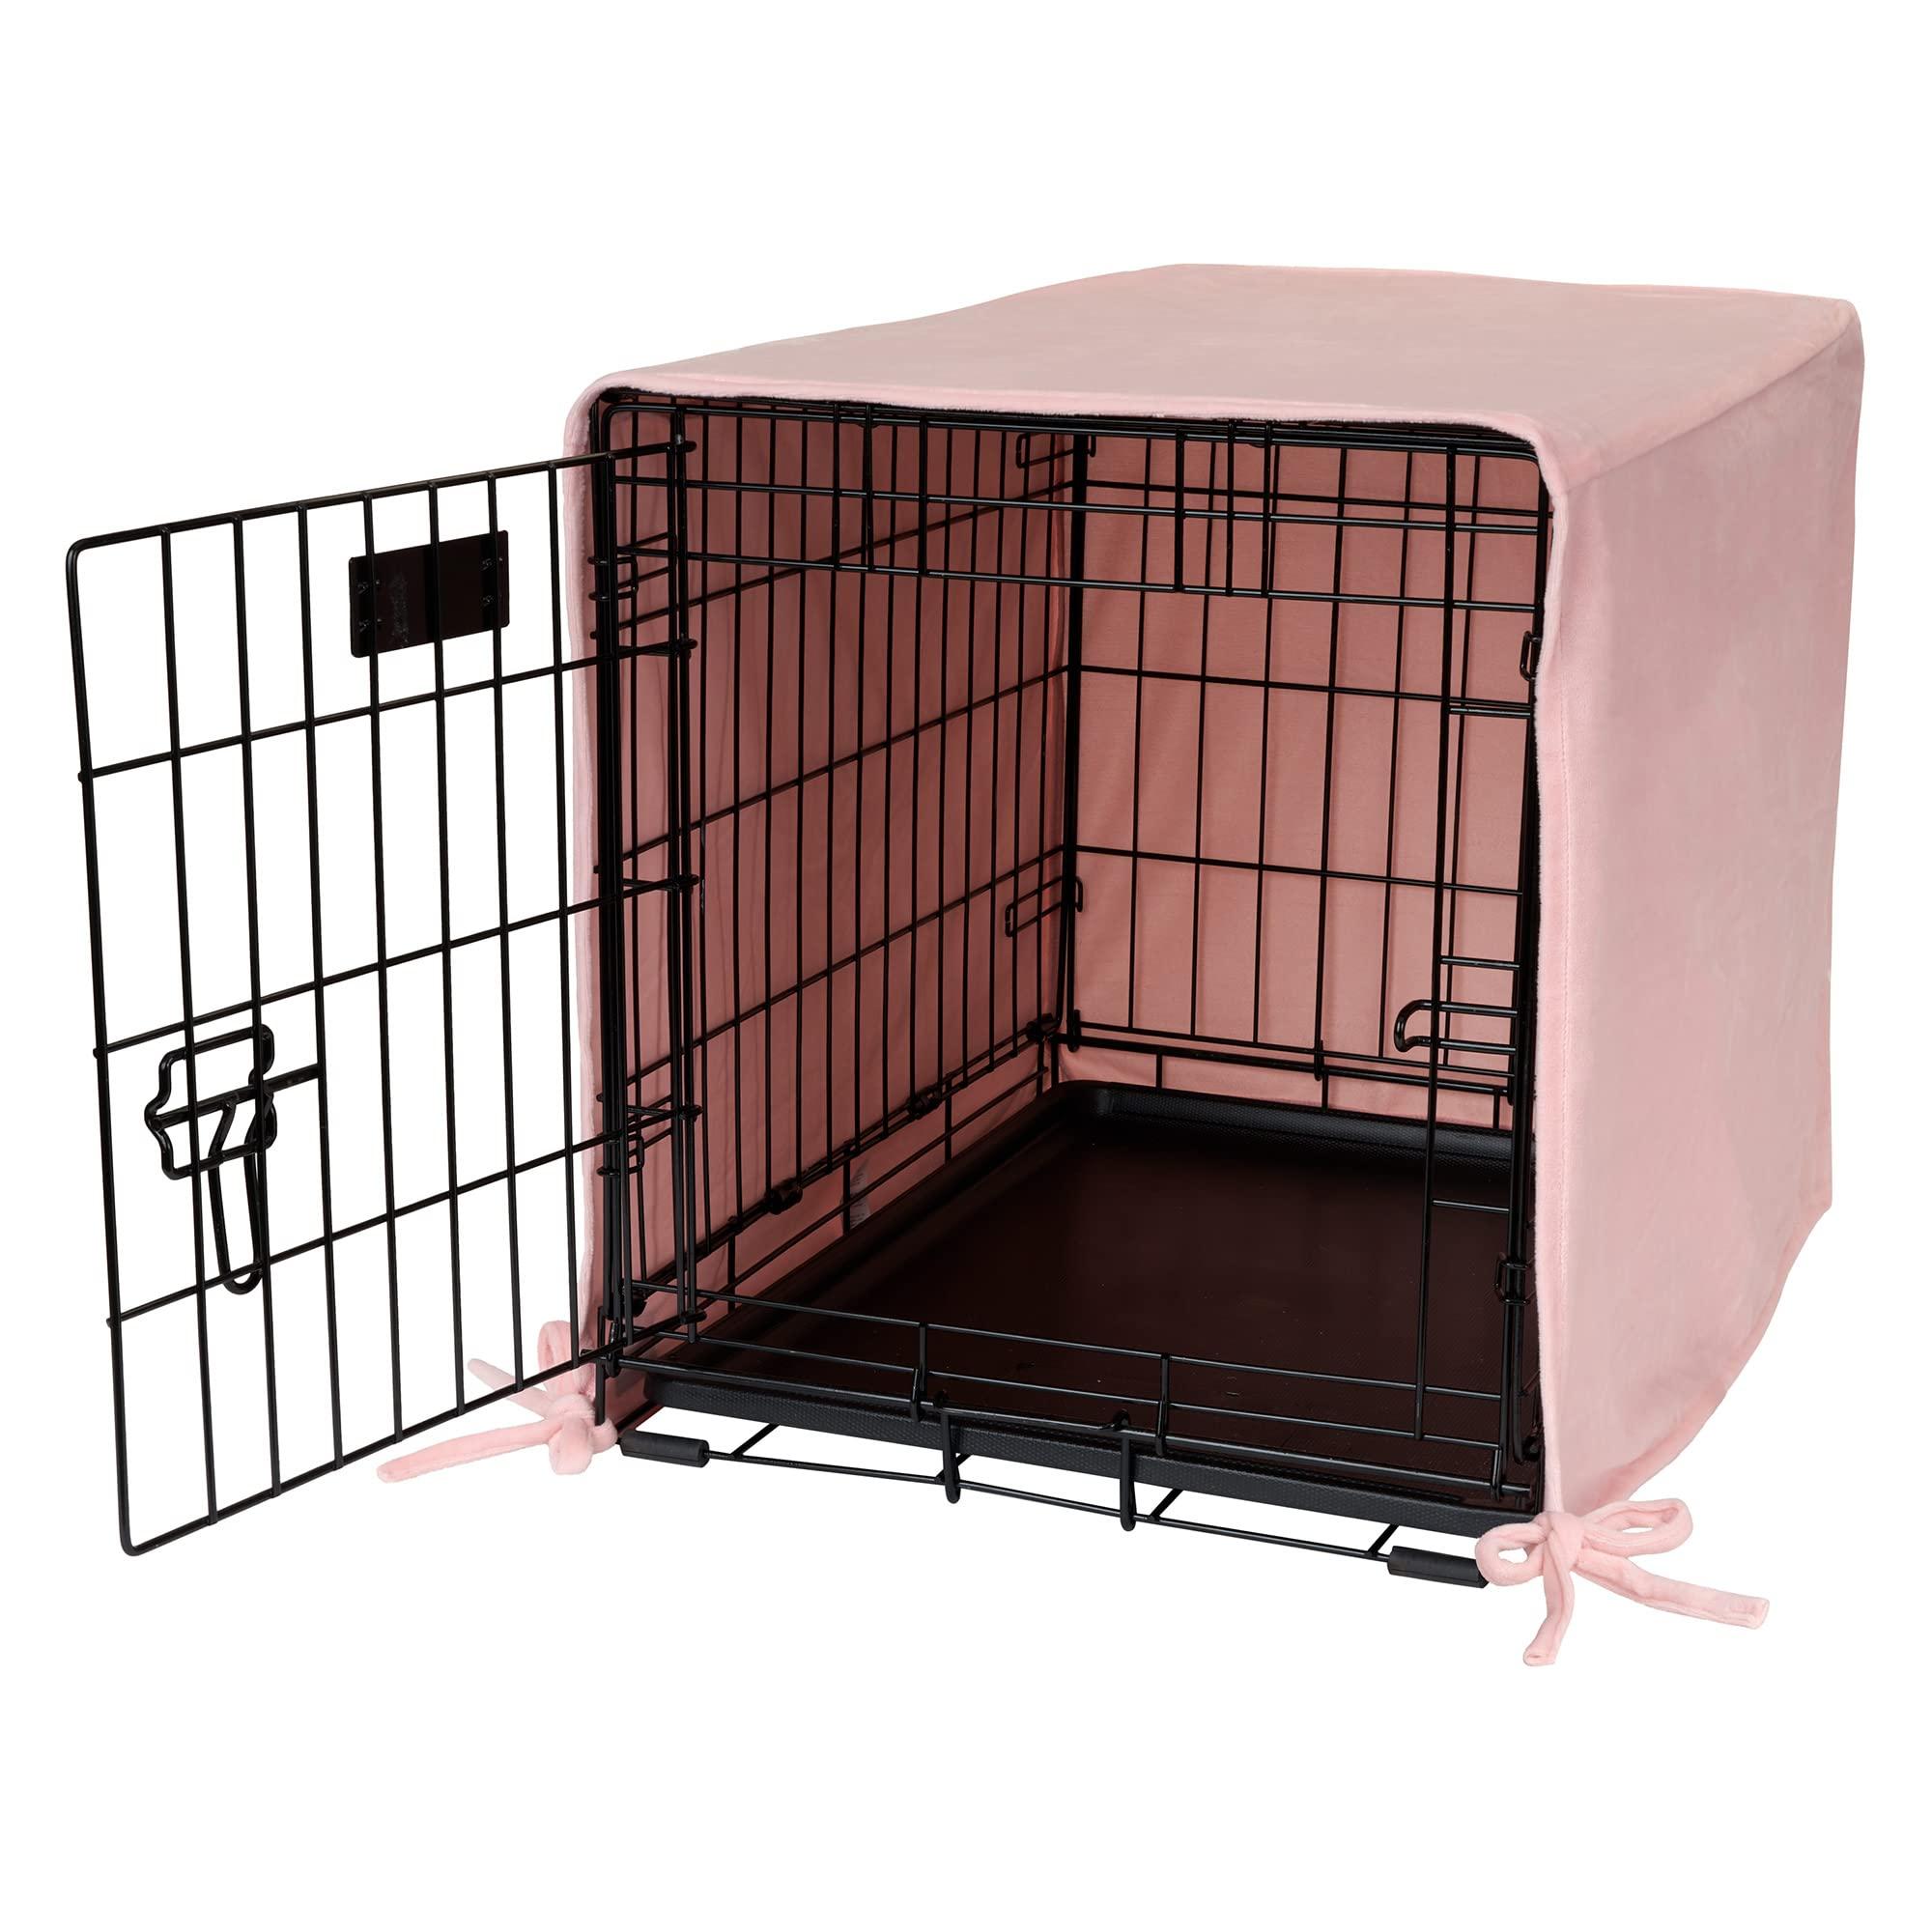 Pet Dreams Breathable Crate Cover - Dog Crate Cover for Single Door Wire Dog Crate, Eco Friendly Dog Kennel Cover, Non Toxic Washable Cover (Pink Blush, Medium 30 Inch Kennel Cover)